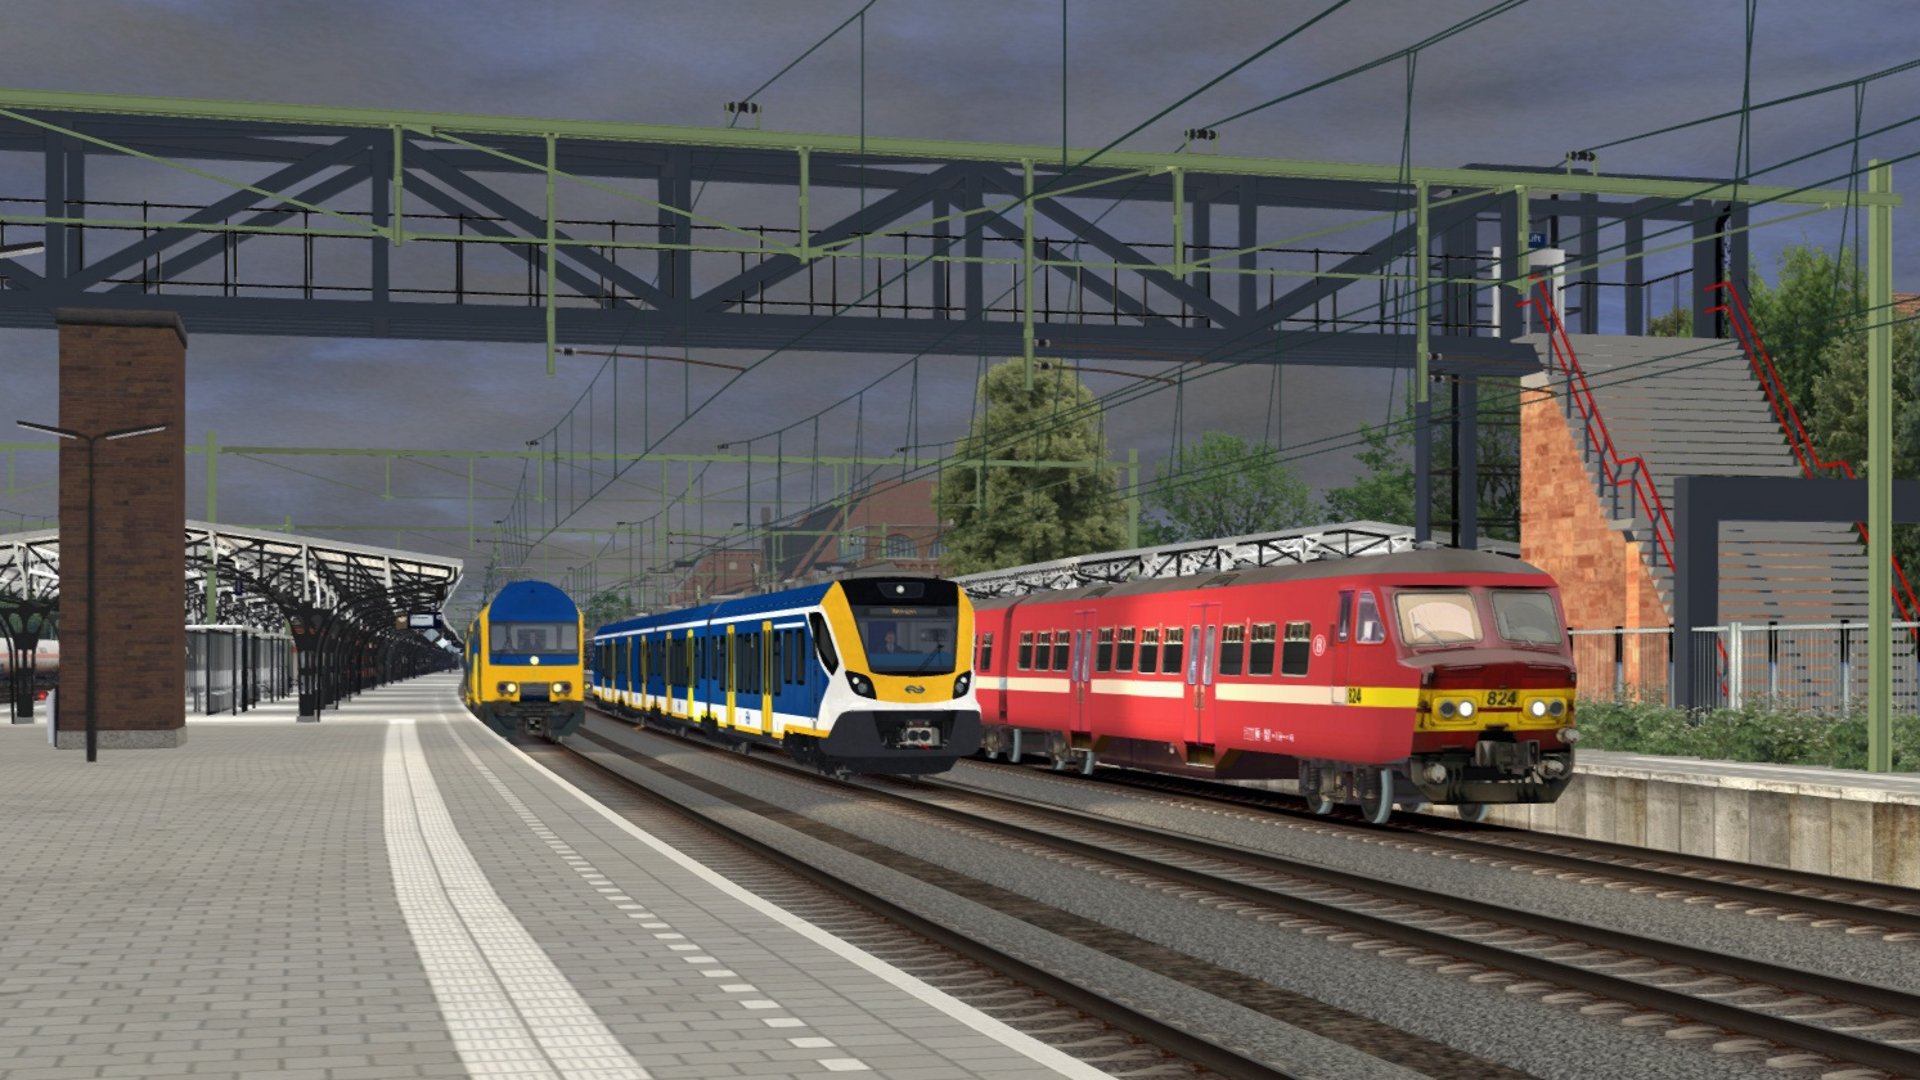 More information about "JacobTrains wins Screenshot of the Month for January 22"